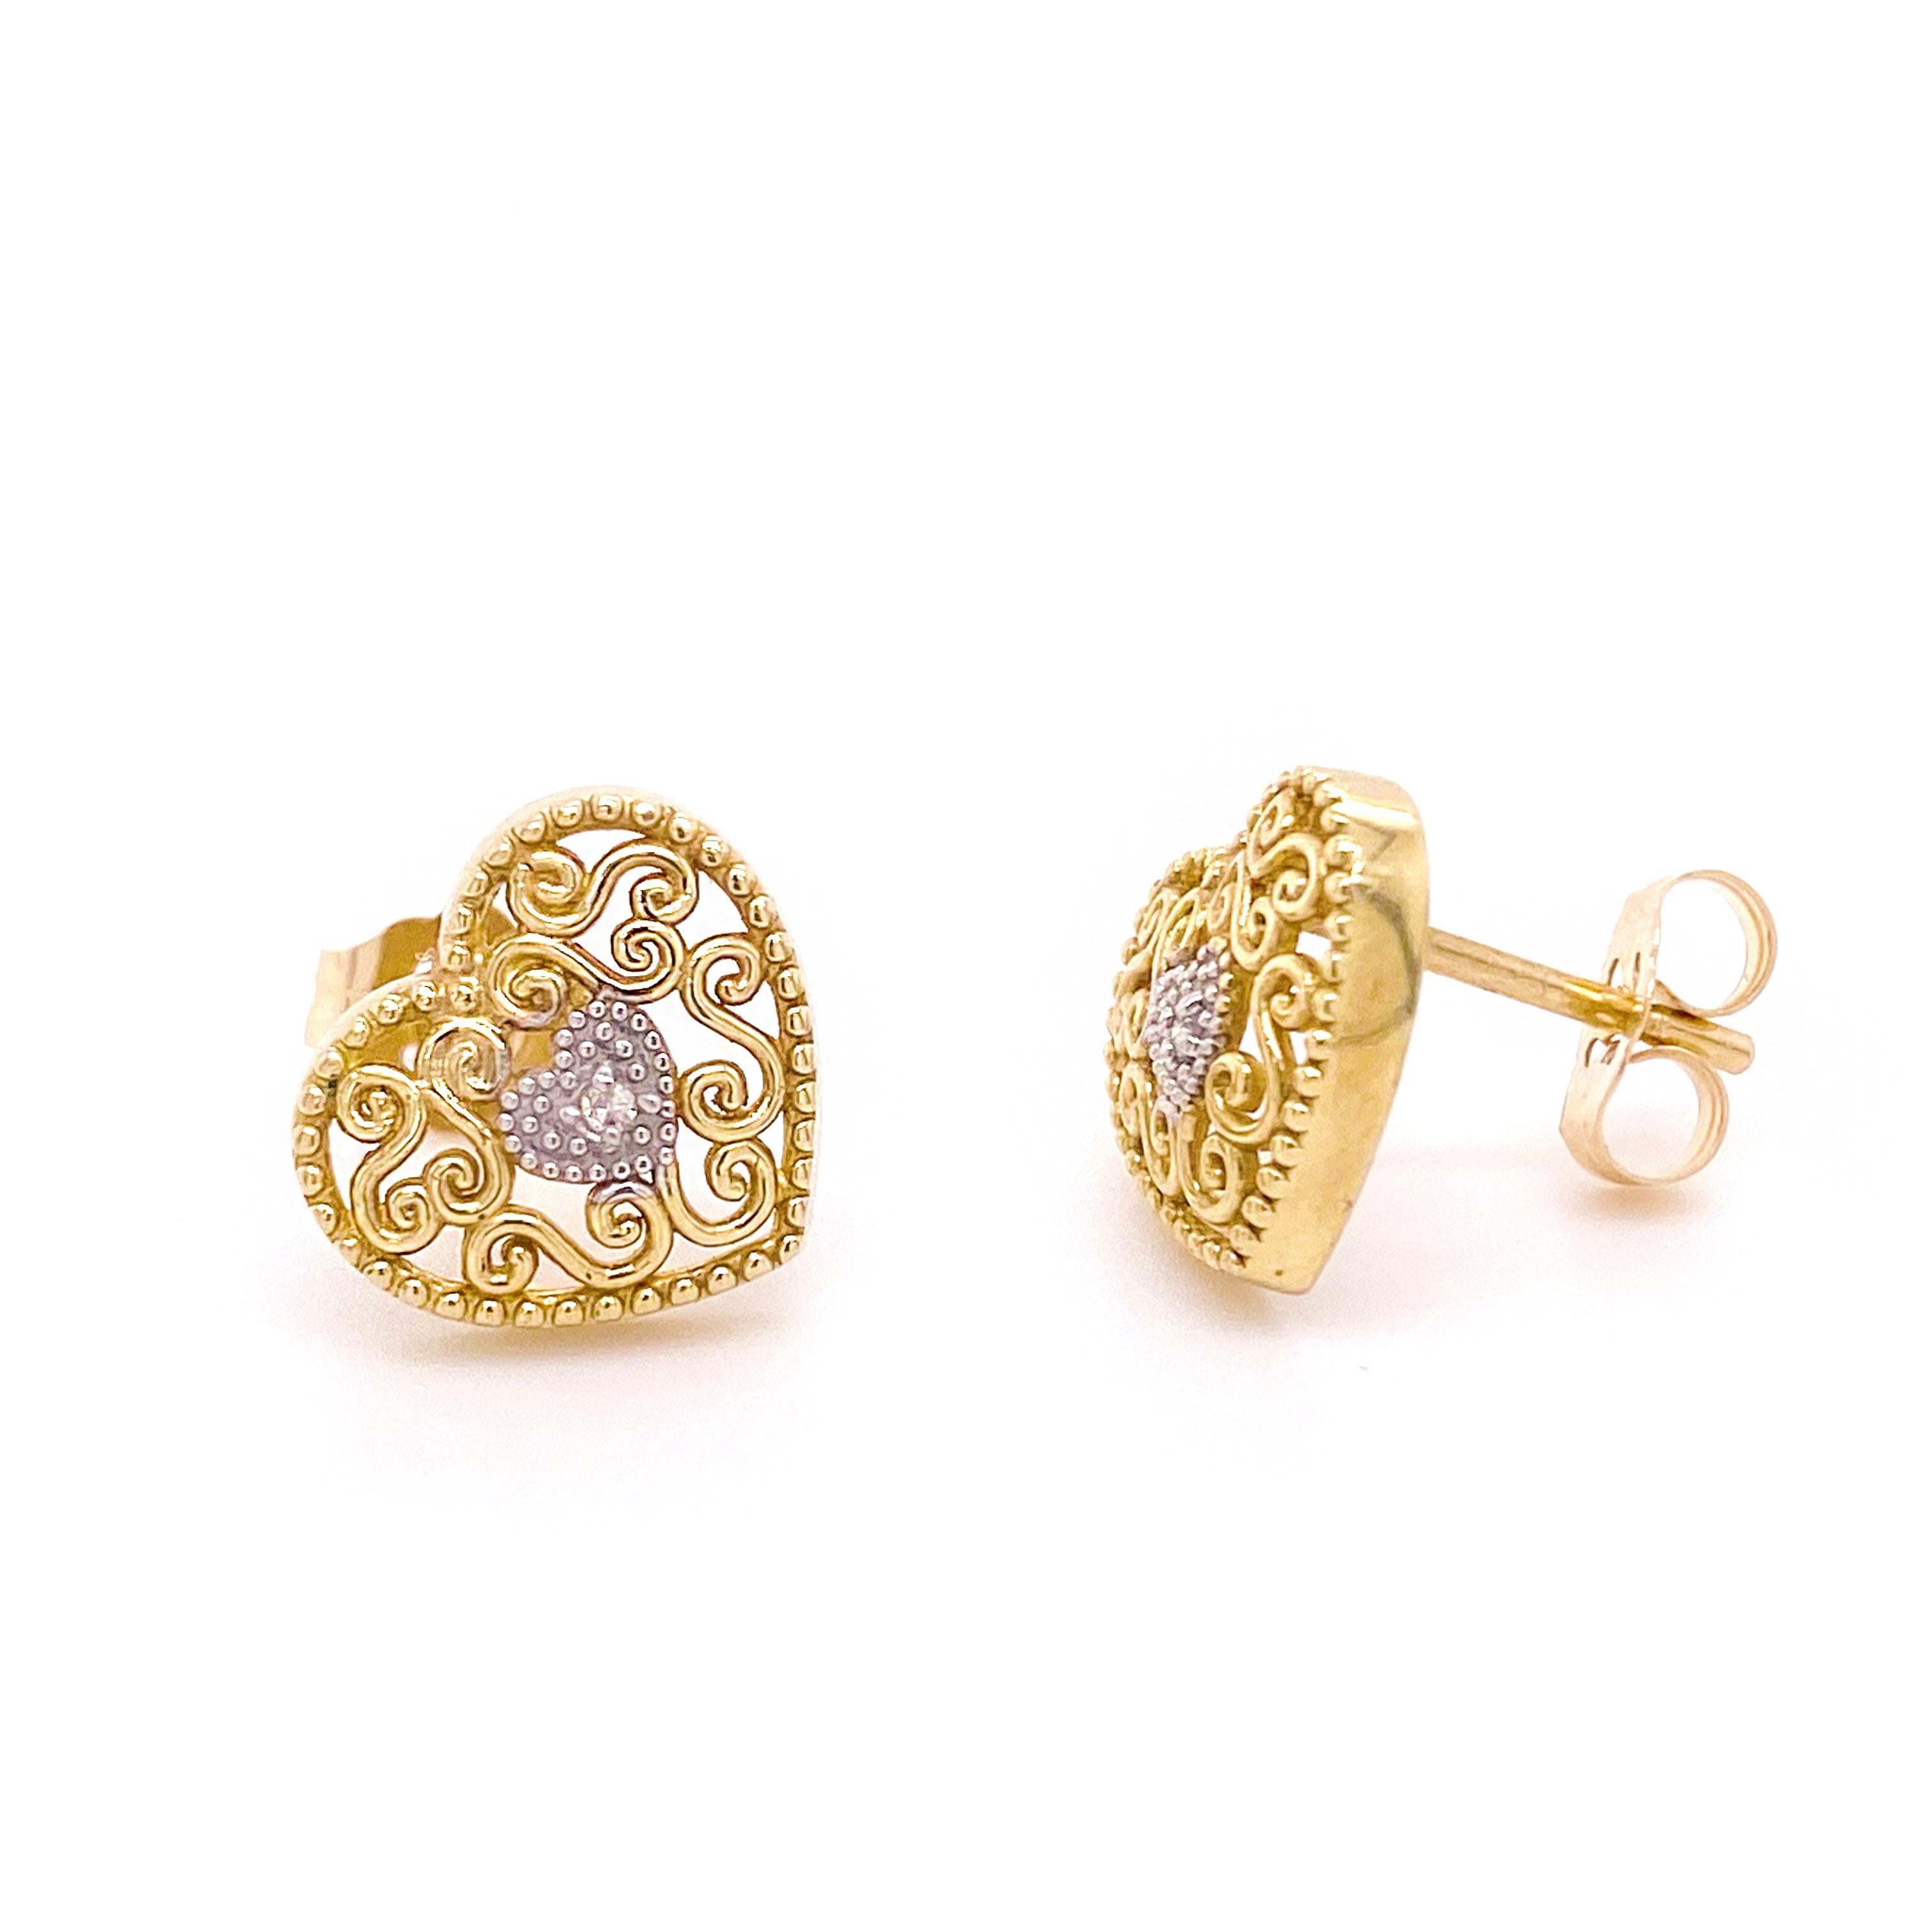 Contemporary Diamond Heart Stud Earrings, Yellow Gold and White Gold, Valentine's, Love For Sale